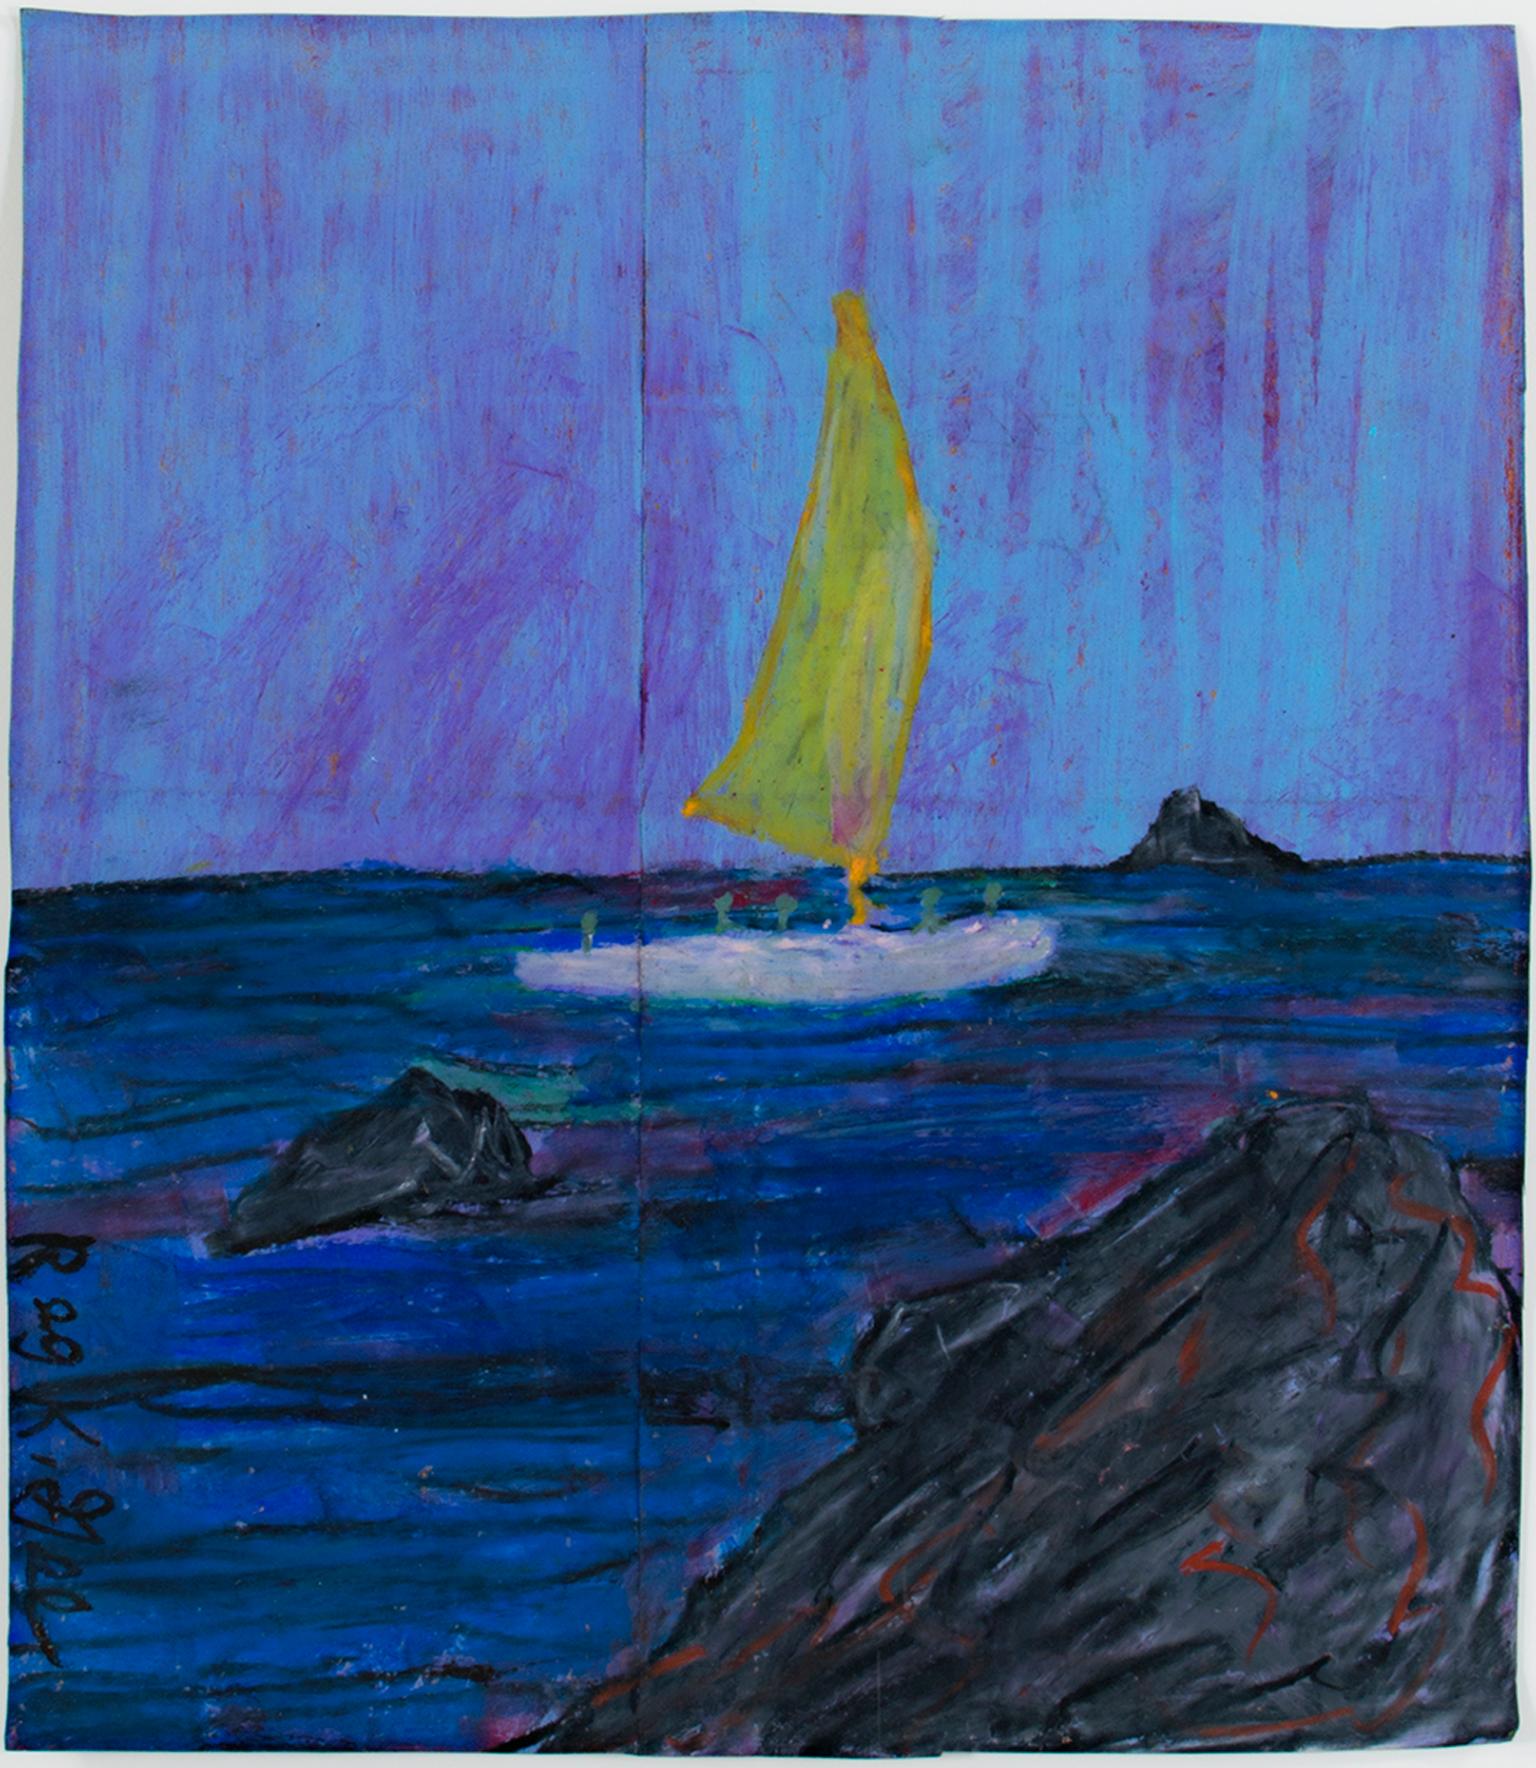 "Arriving to Island, " Oil Pastel on Grocery Bag signed by Reginald K. Gee